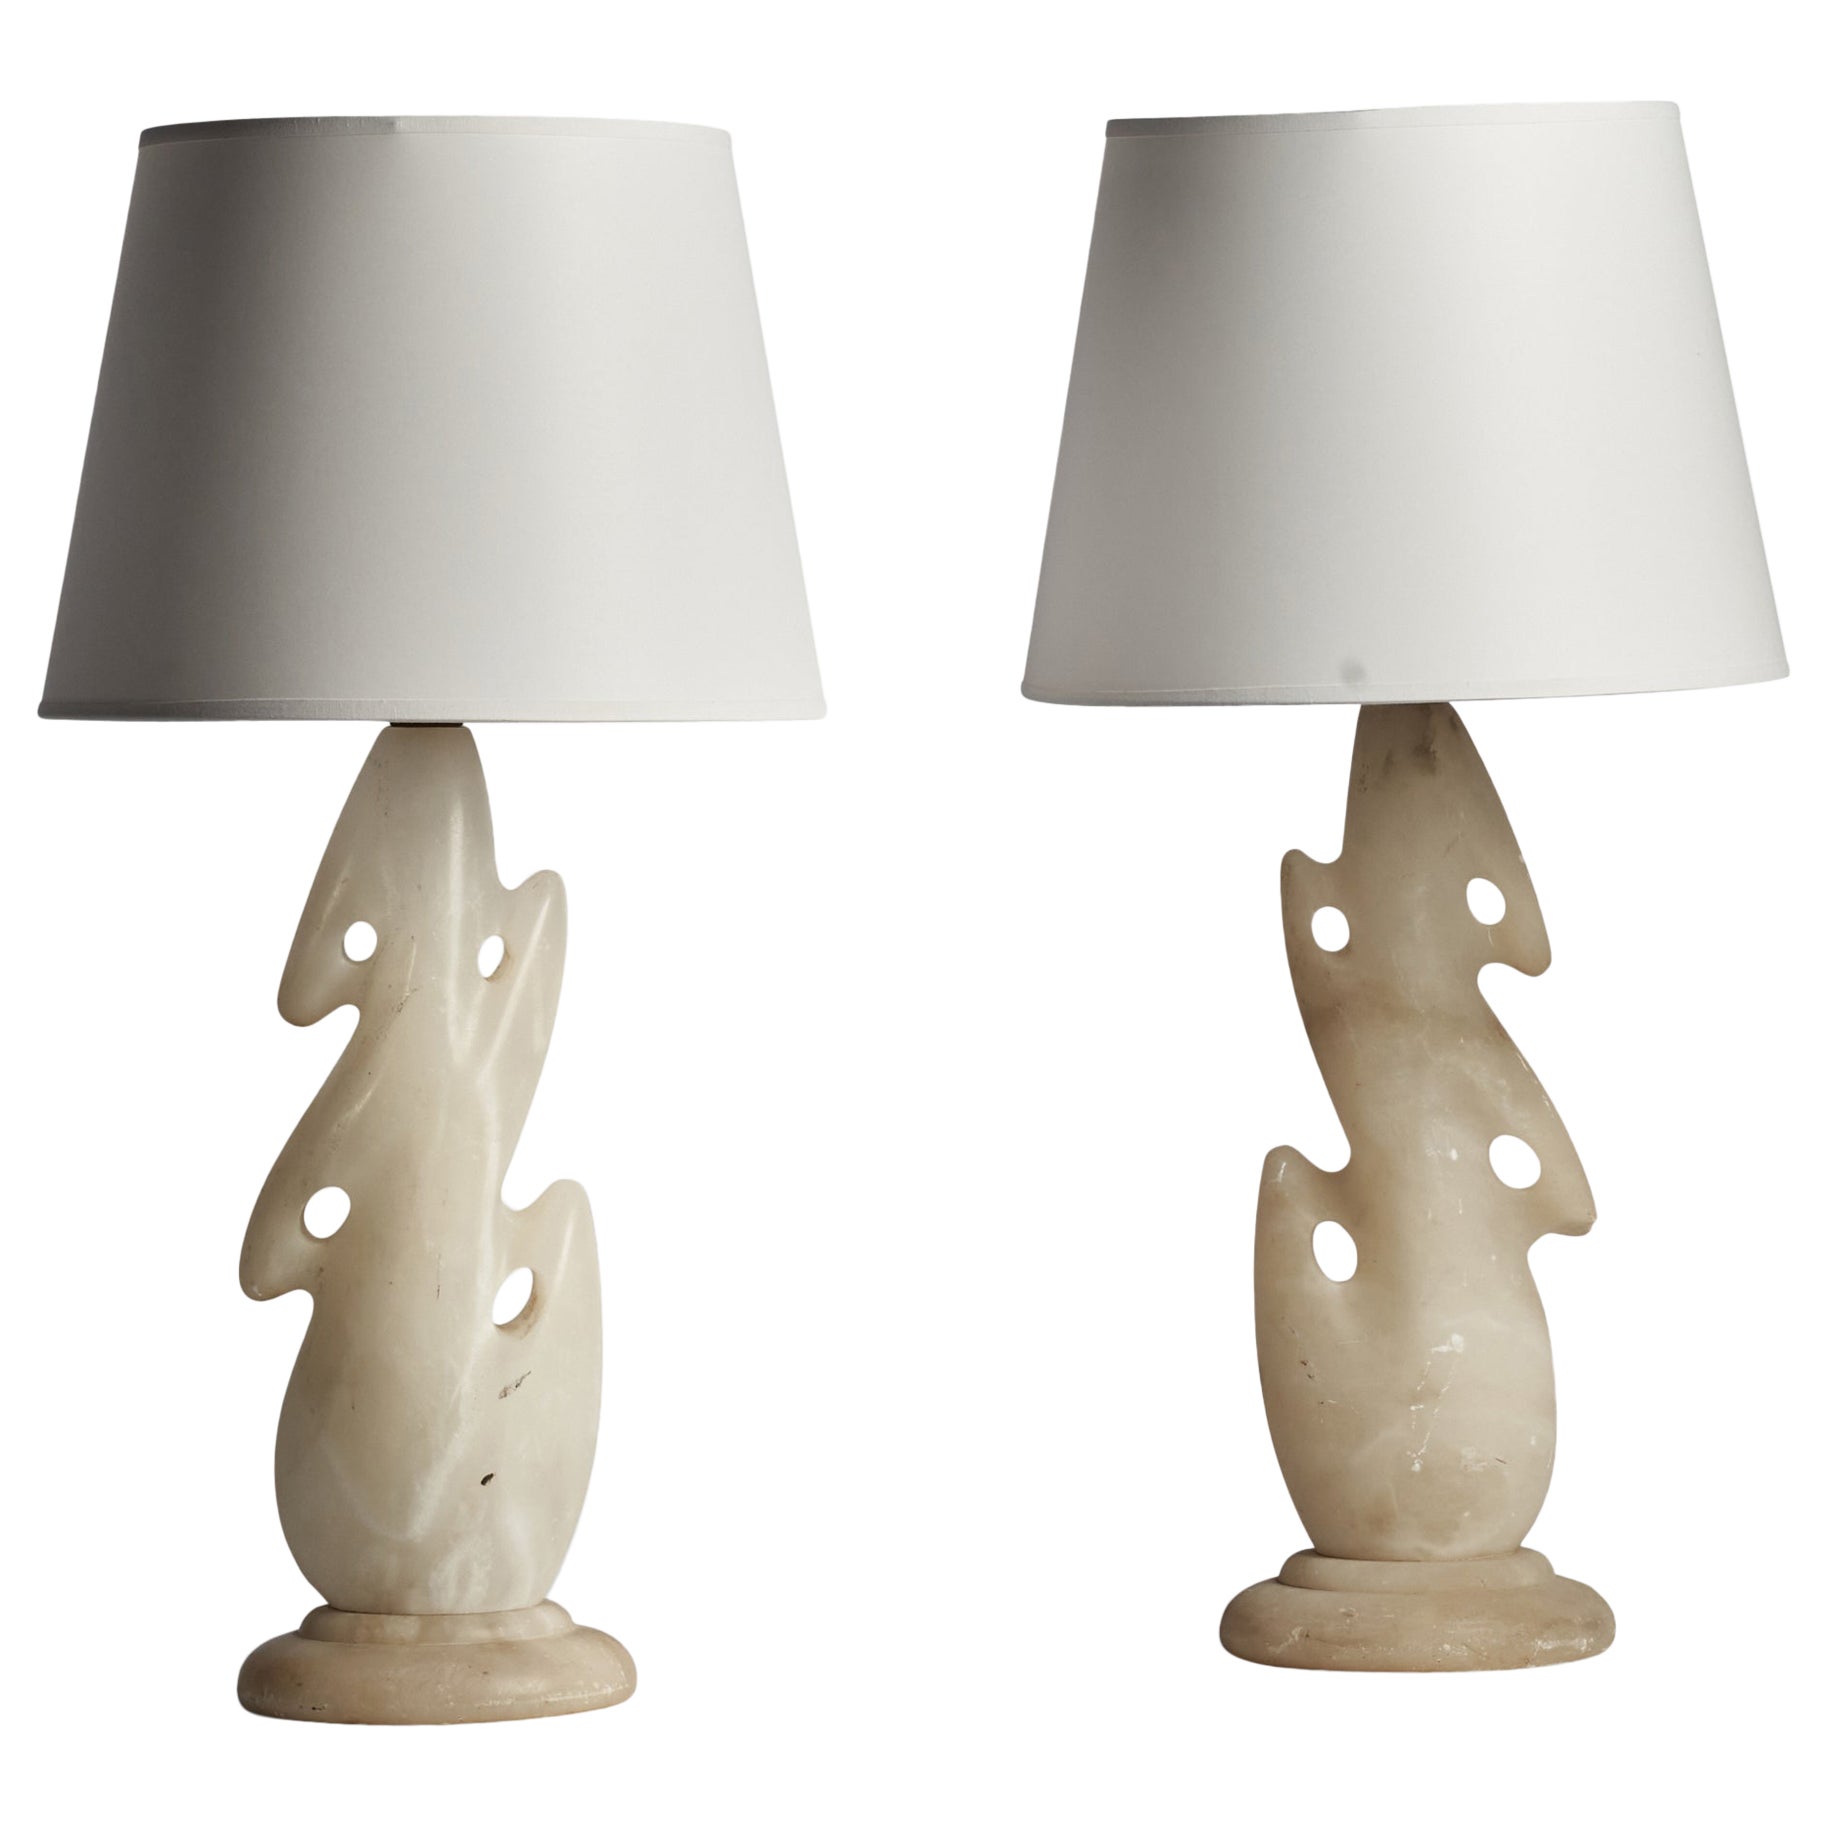 American Designer, Freeform Table Lamps, Onyx, USA, 1950s For Sale